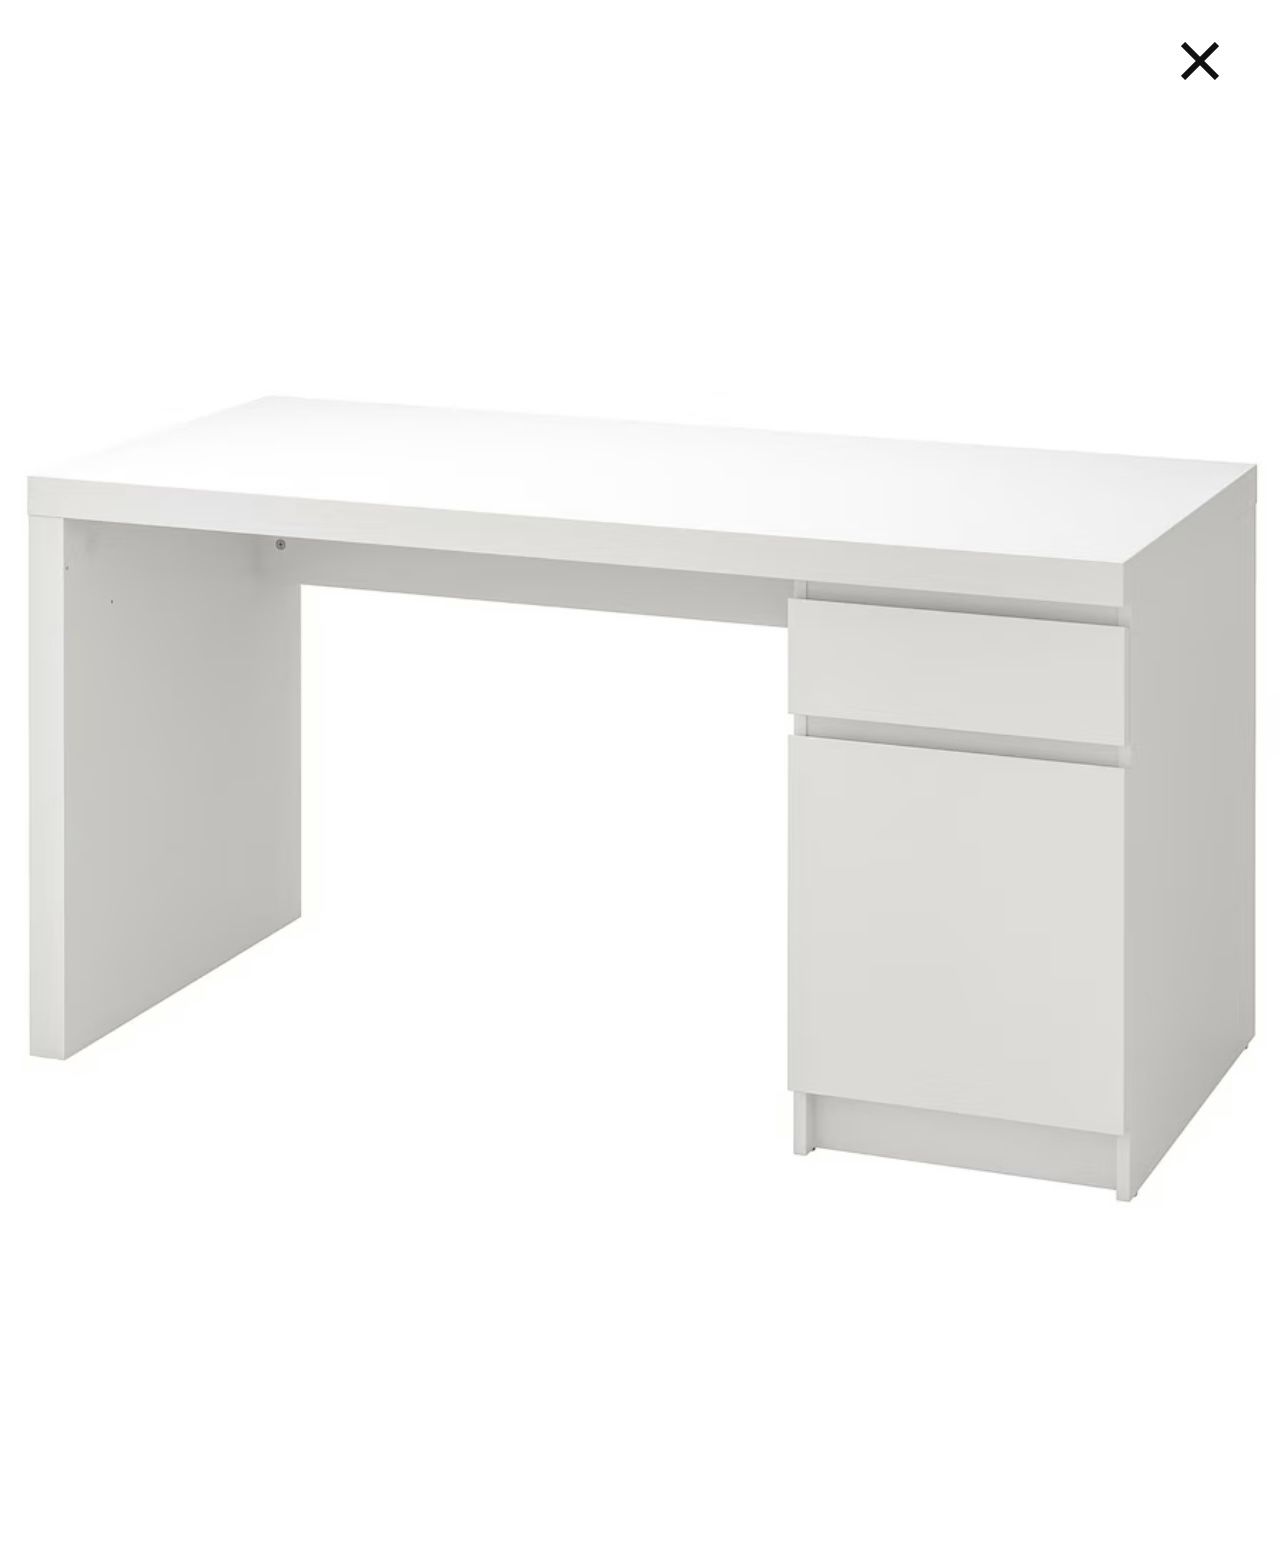 IKEA Desk with Drawer and Storage